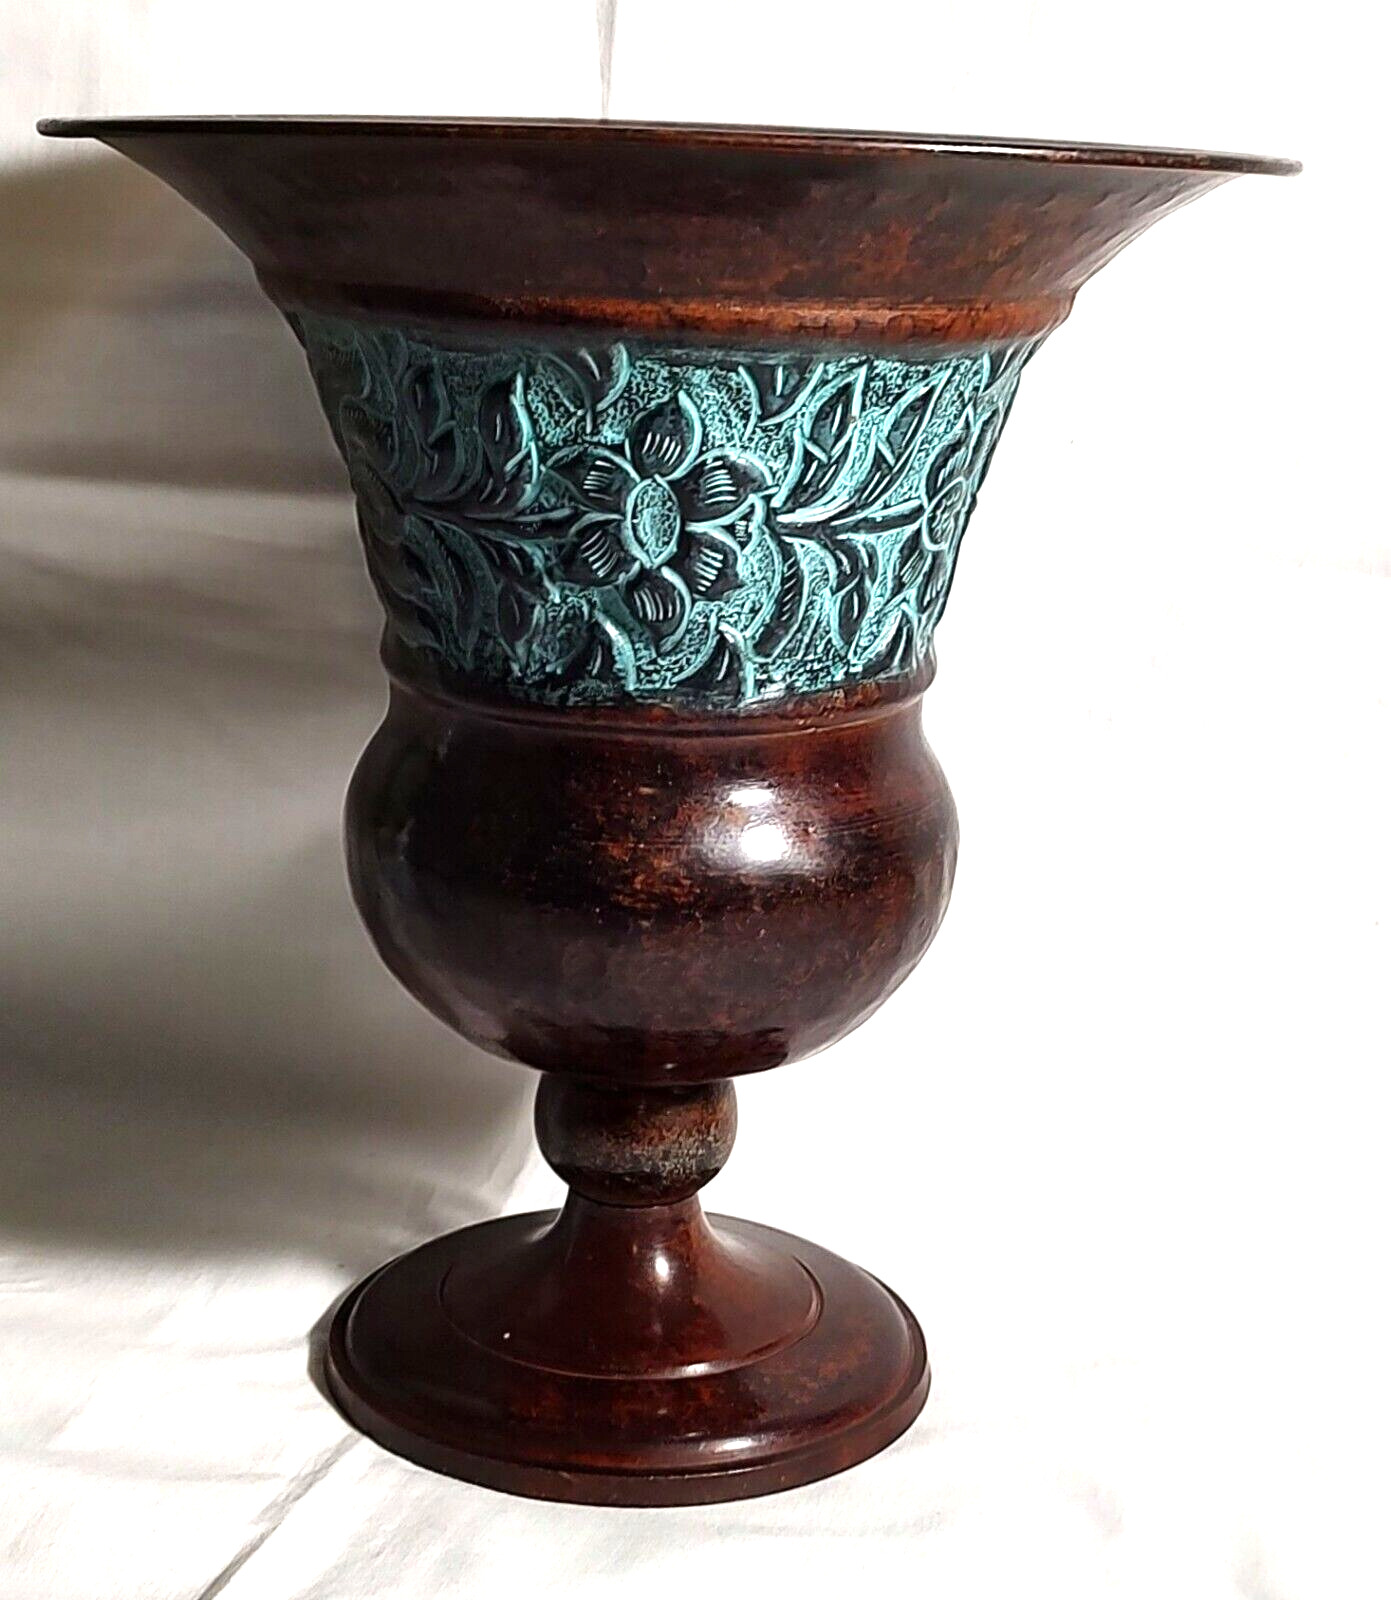 Metal Urn Style Floral Vase with w/ a turquoise and bronze finish Made in India